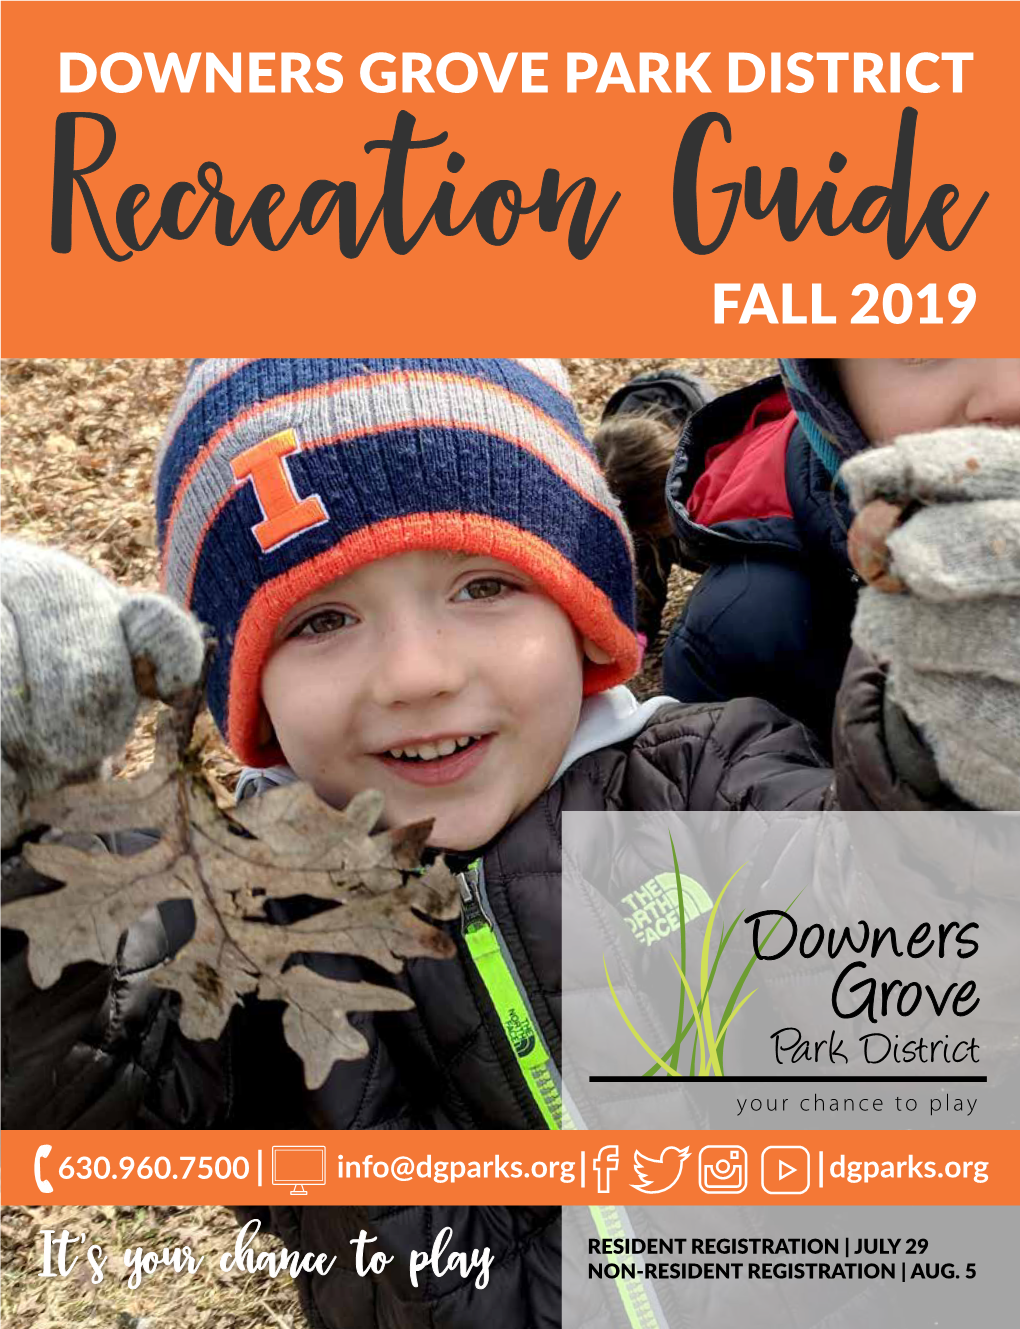 Downers Grove Park District Fall 2019